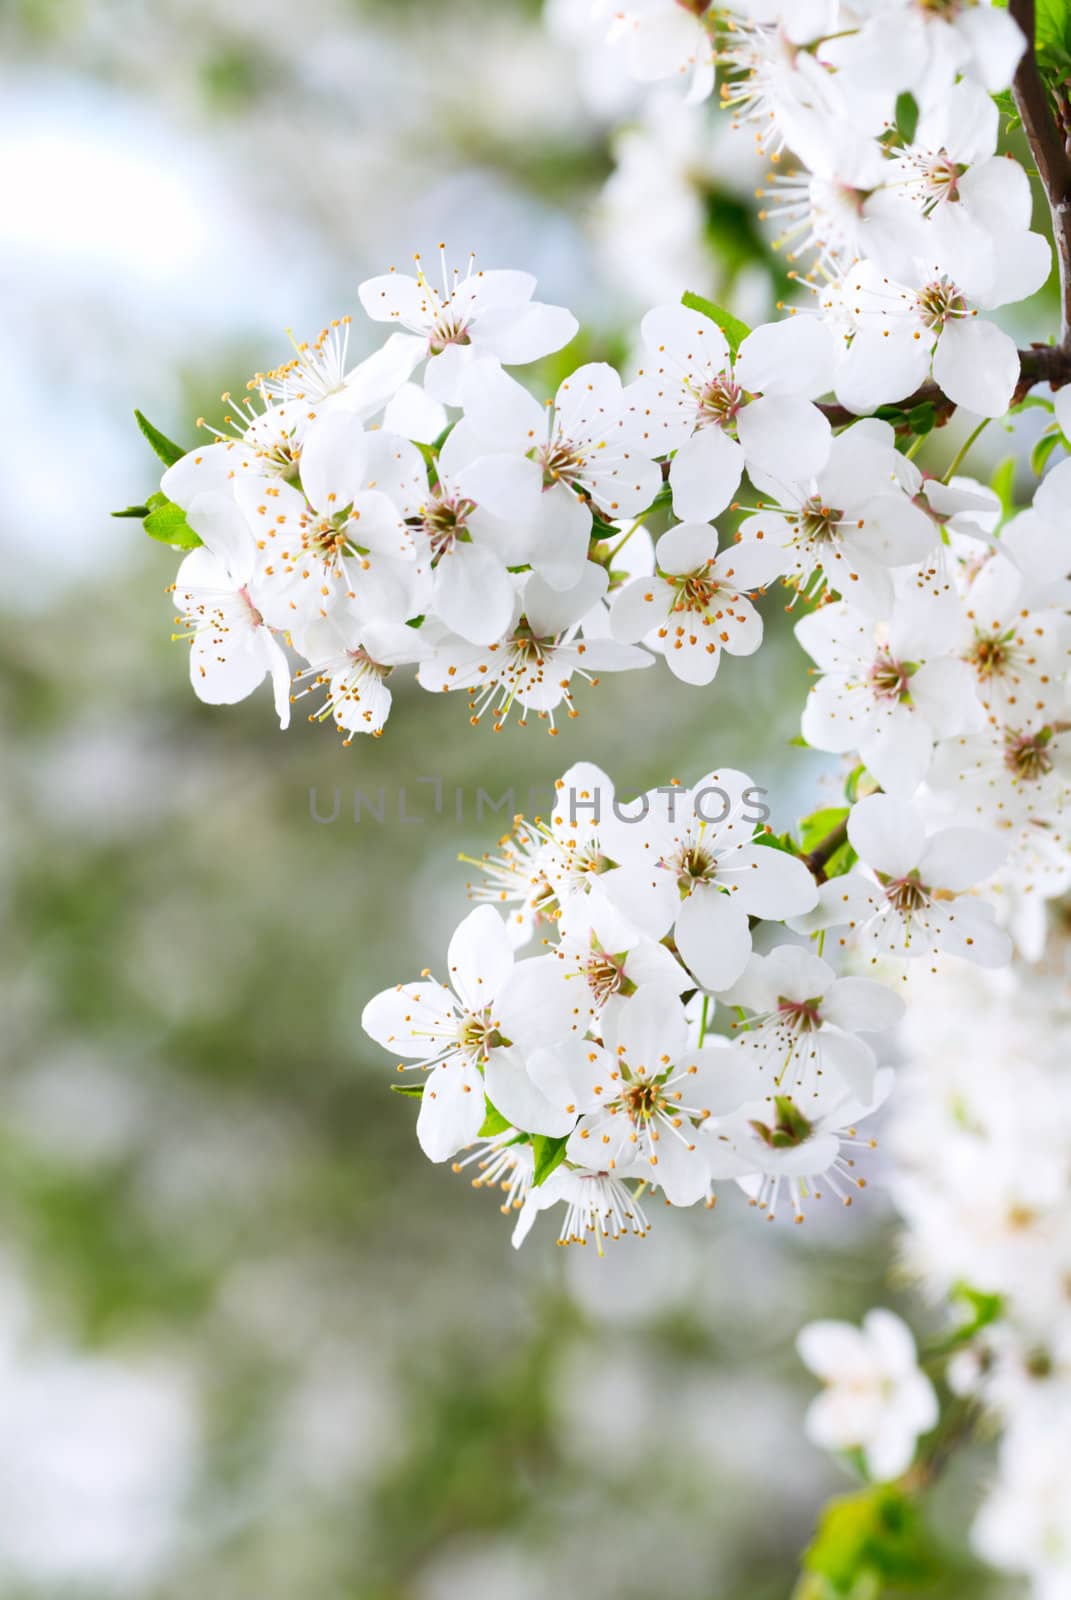 Blooming spring tree background, a close-up of white cherry flowers